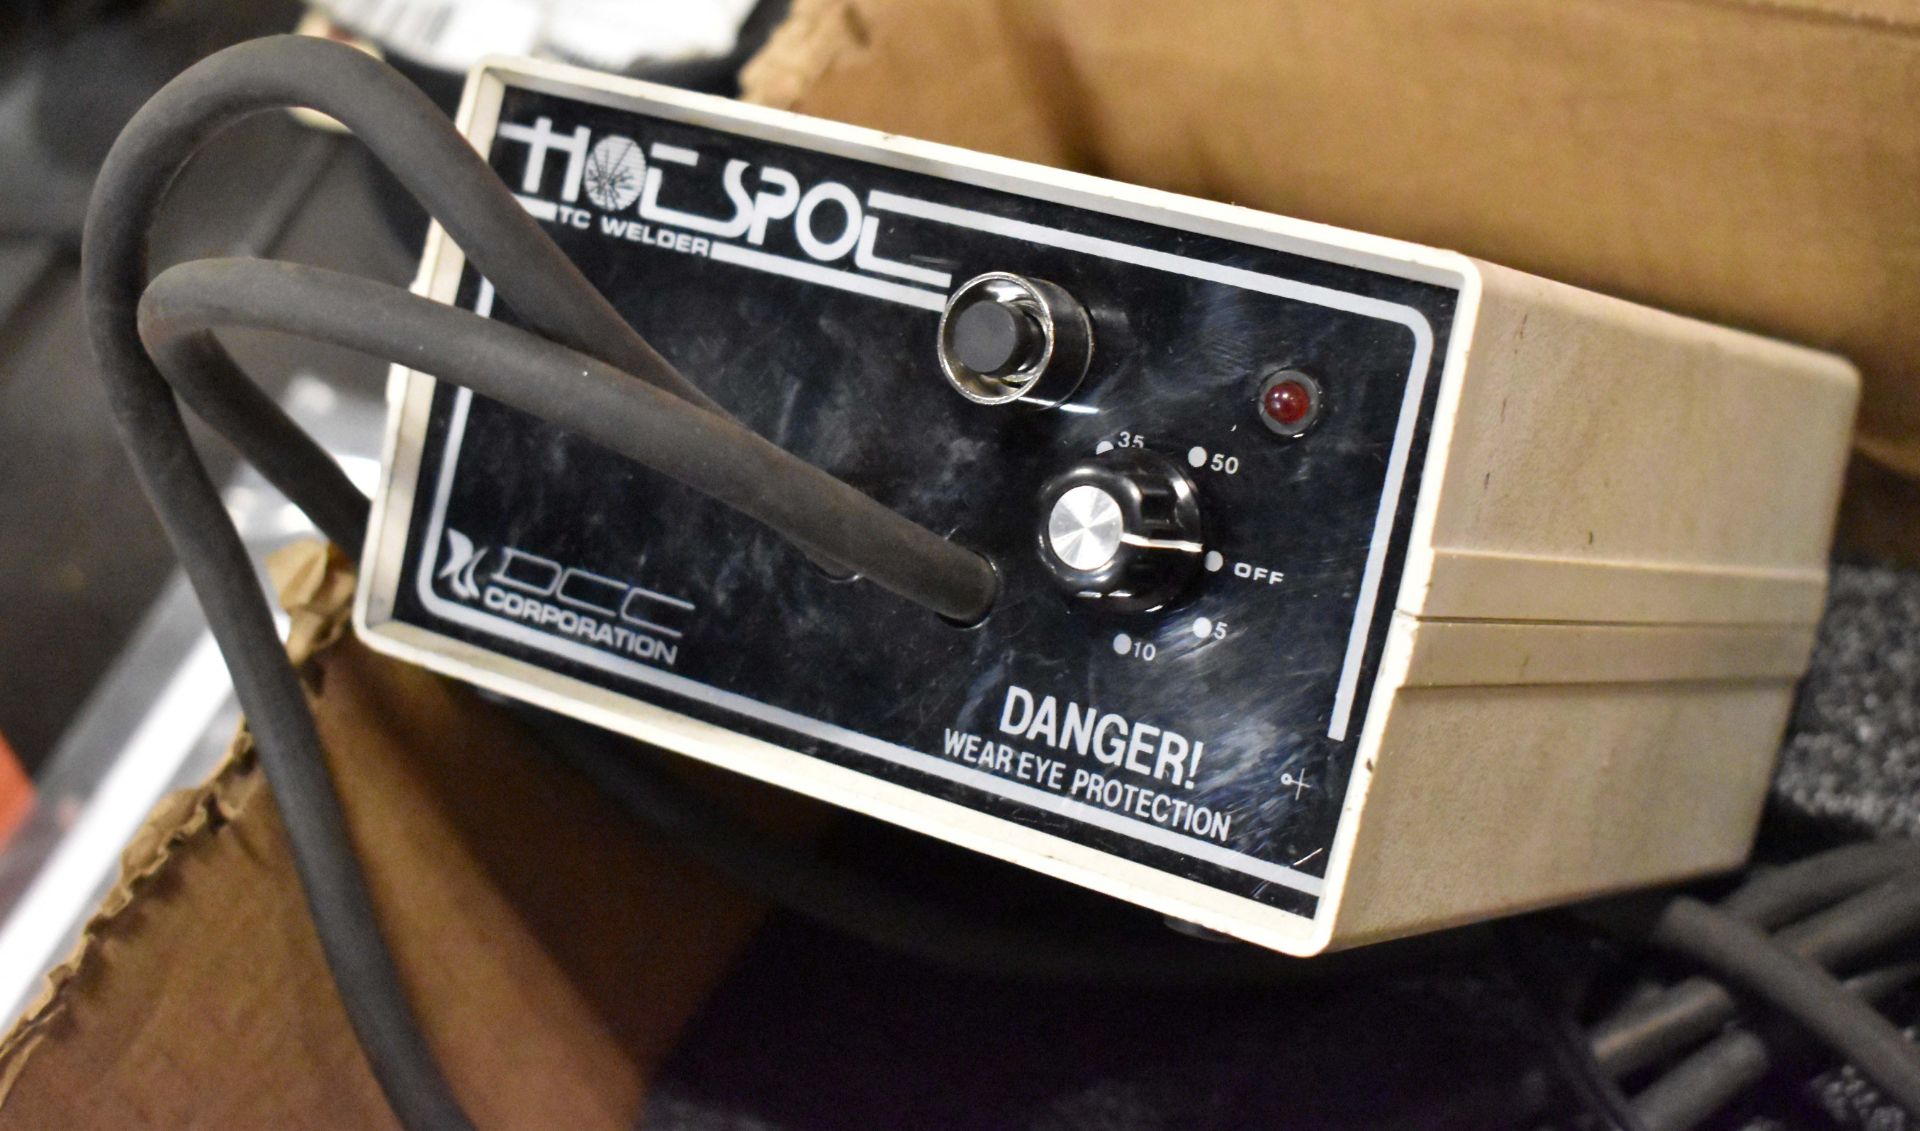 MILLER HOT SPOT THERMOCOUPLE WELDER ATTACHMENT [RIGGING FEES FOR LOT #19 B - $10 USD PLUS APPLICABLE - Image 2 of 3